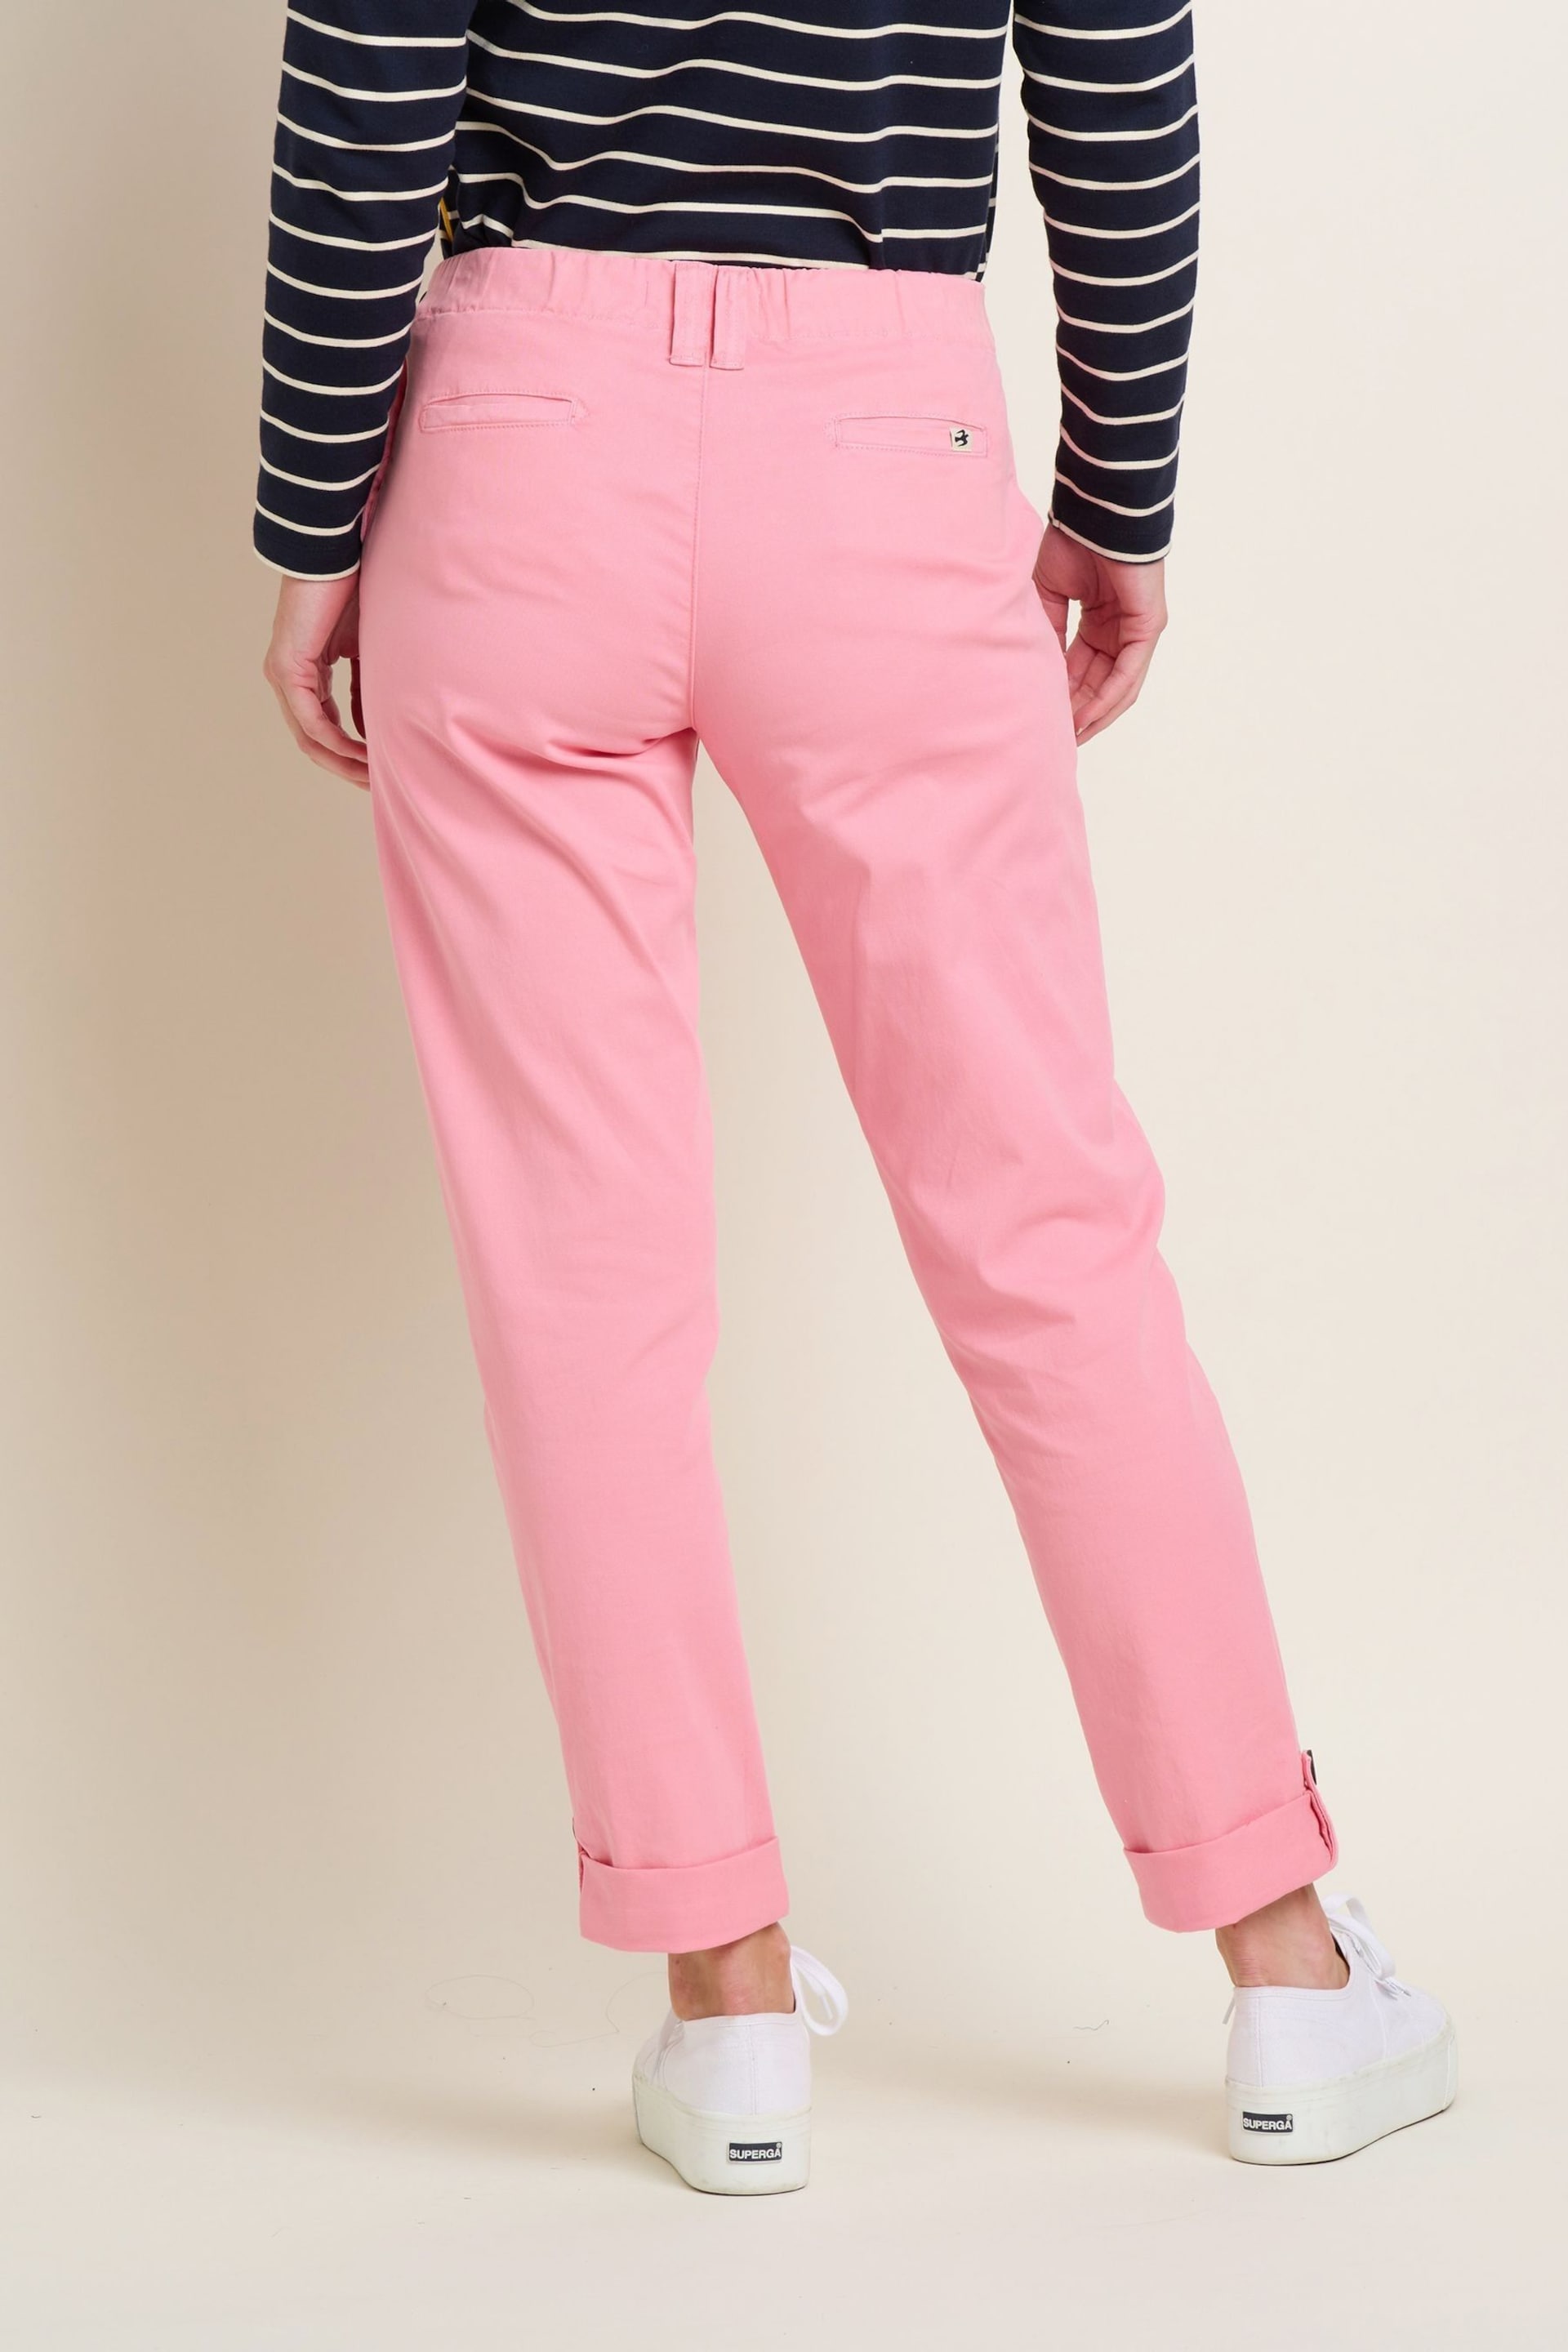 Brakeburn Pink Button Side Trousers - Image 2 of 4